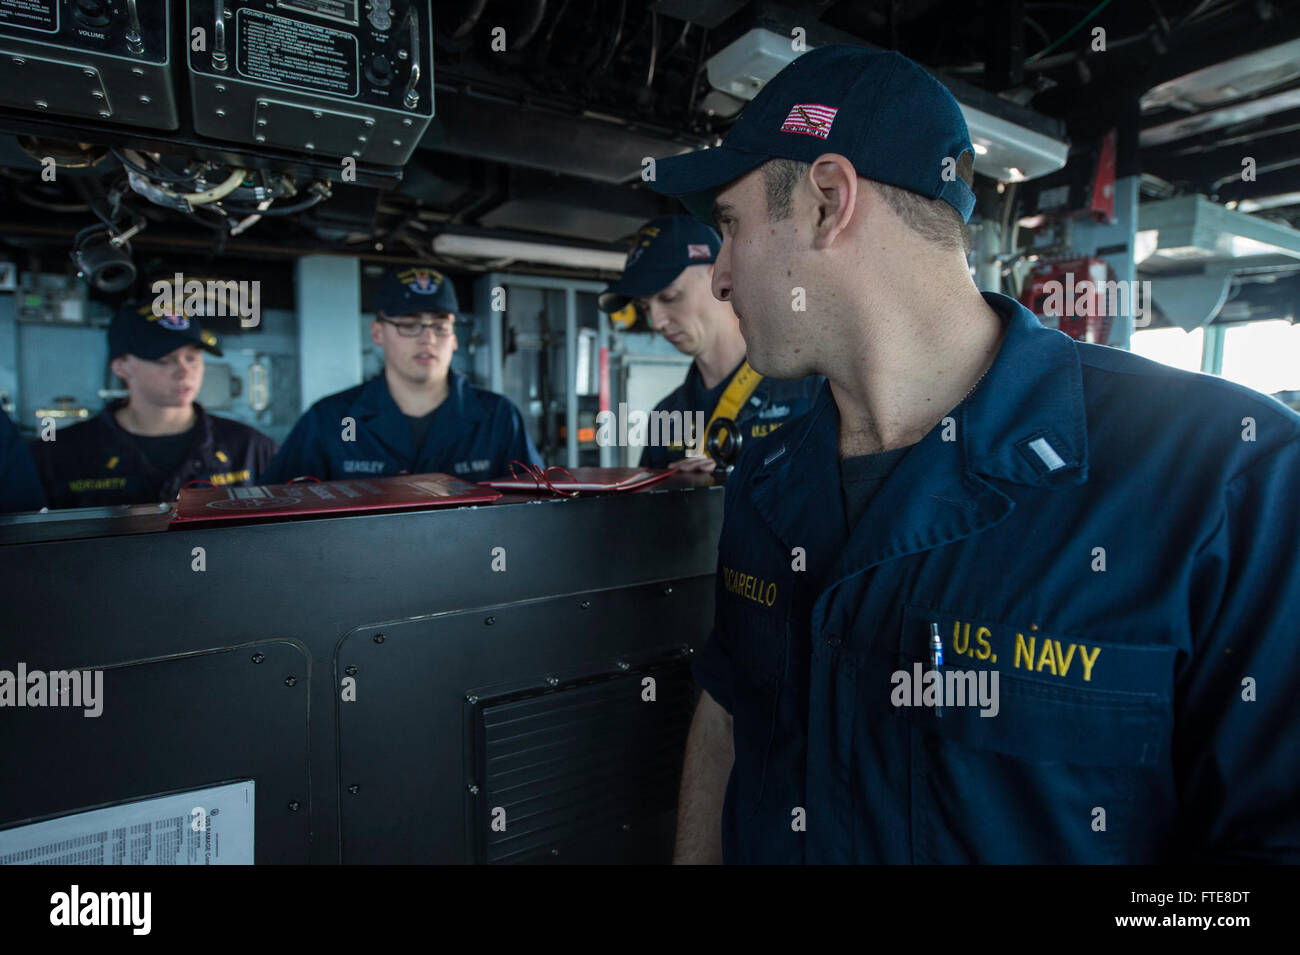 131209-N-VC236-008: MEDITERRANEAN SEA (Dec. 9, 2013) - Lt.j.g. Andy Muscarello, right, gives directions to the helm during a simulated loss of steering drill aboard the Arleigh Burke-class guided-missile destroyer USS Ramage (DDG 61). Ramage, homeported in Norfolk, Va., is on a scheduled deployment supporting maritime security operations and theater security cooperation efforts in the U.S. 6th Fleet area of operations. (U.S. Navy Photo by Mass Communication Specialist 3rd Class Jackie Hart/Released) Stock Photo